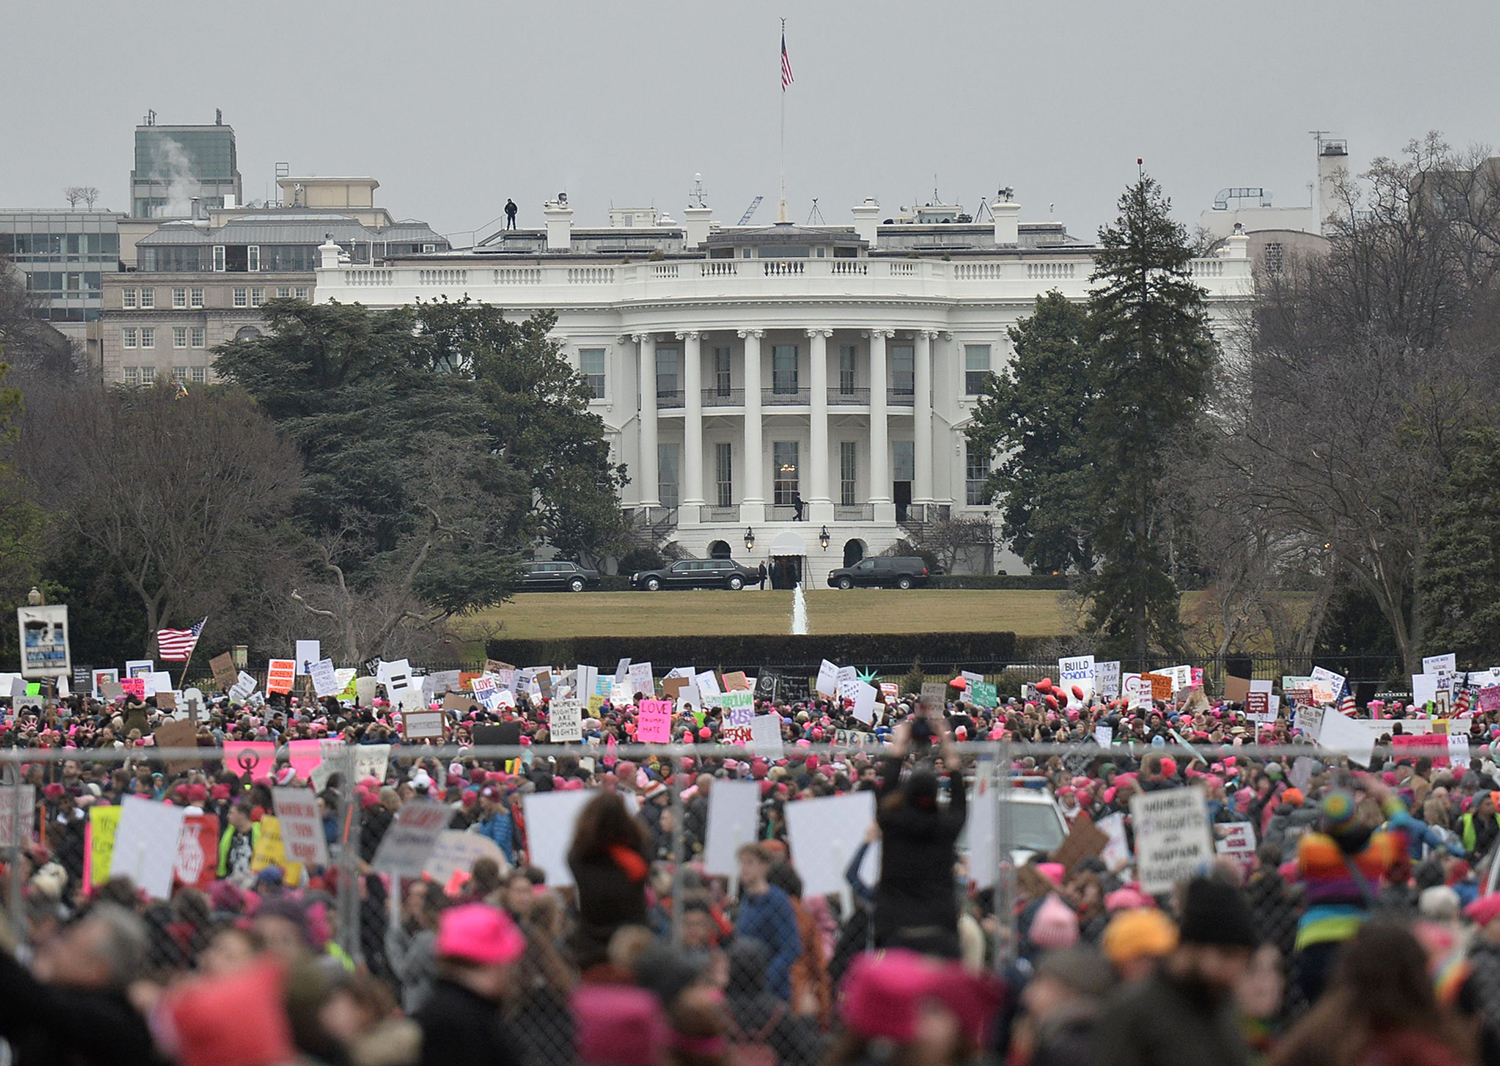 TOPSHOT - Demonstrators protest near the White House in Washington, DC, for the Women's March on January 21, 2017. Hundreds of thousands of protesters spearheaded by women's rights groups demonstrated across the US to send a defiant message to US President Donald Trump. / AFP PHOTO / Andrew CABALLERO-REYNOLDS / TT / kod 444